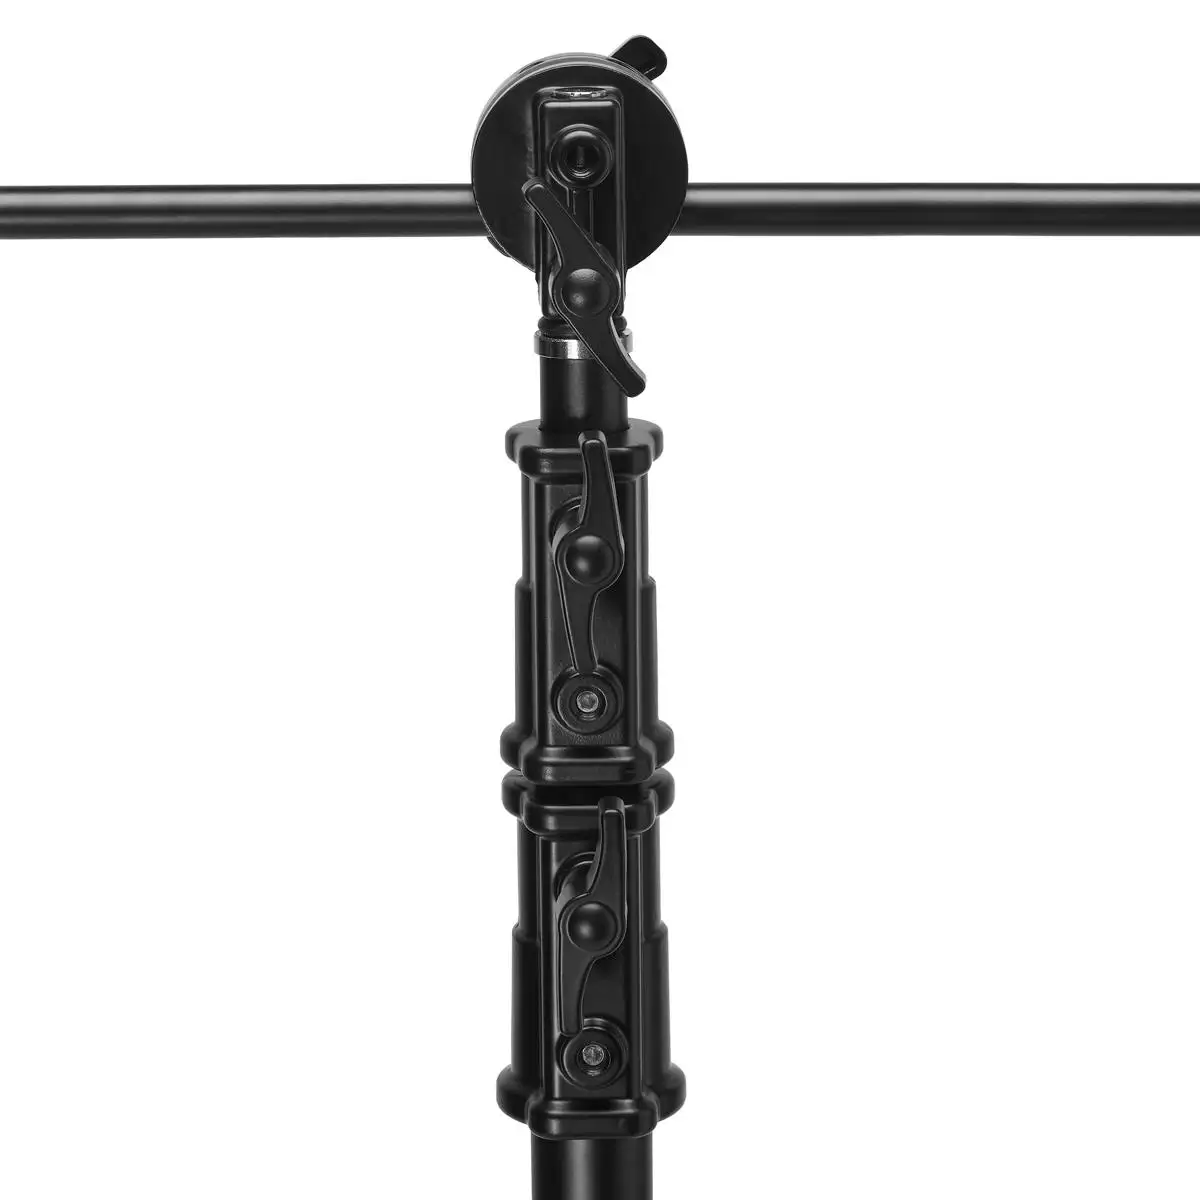 Black Stainless Steel Heavy Duty C Stand 1.5-3.3 Meters Adjustable Photography Sturdy Tripod with cross bar